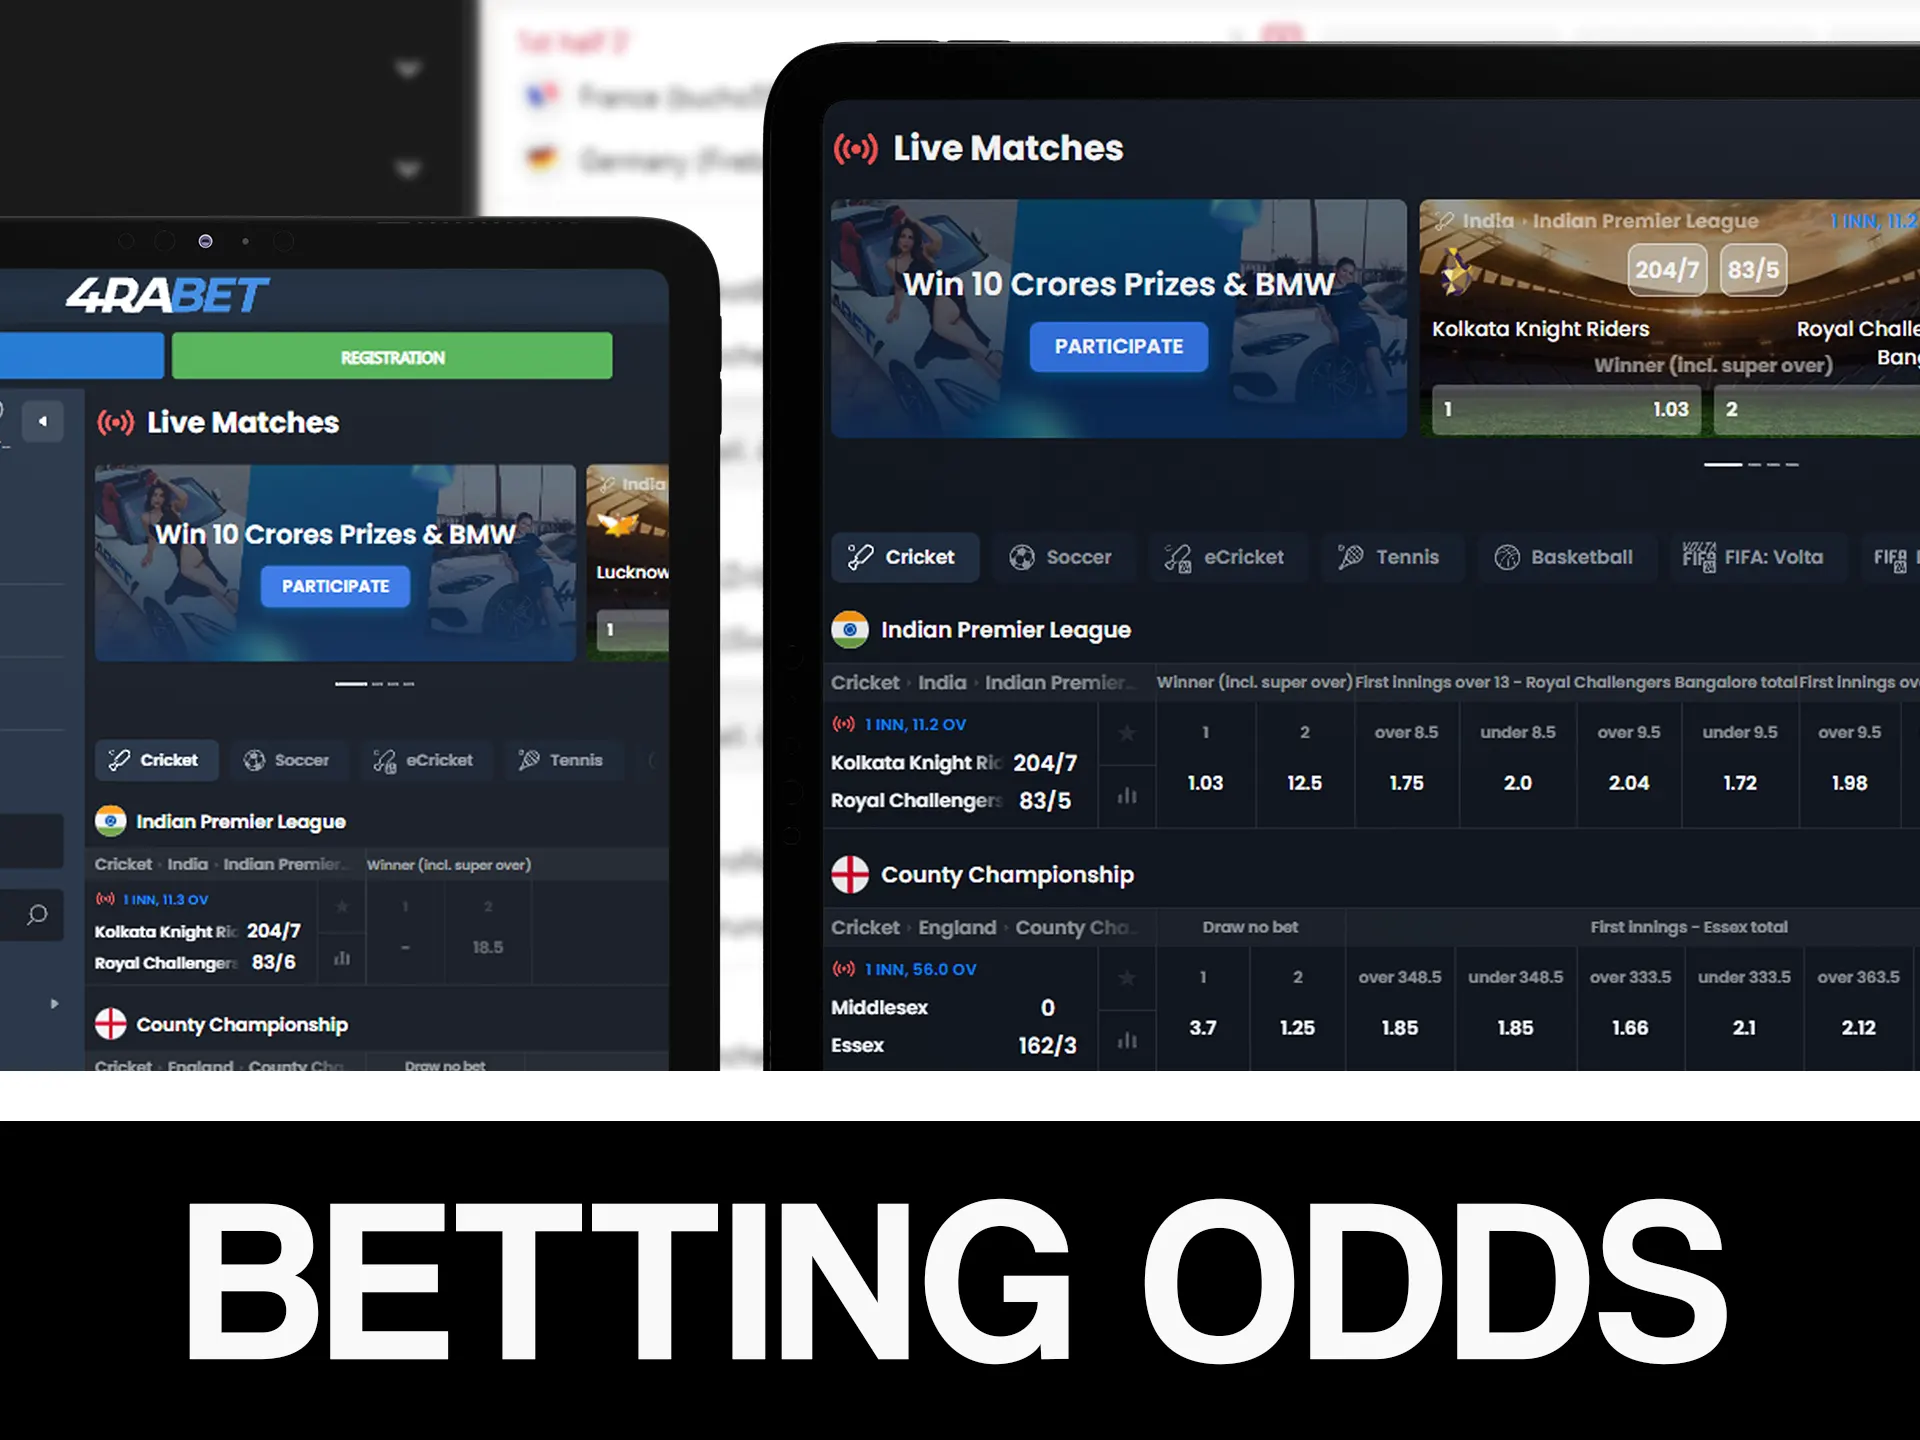 Search for best betting odds for cricket matches before making bet.